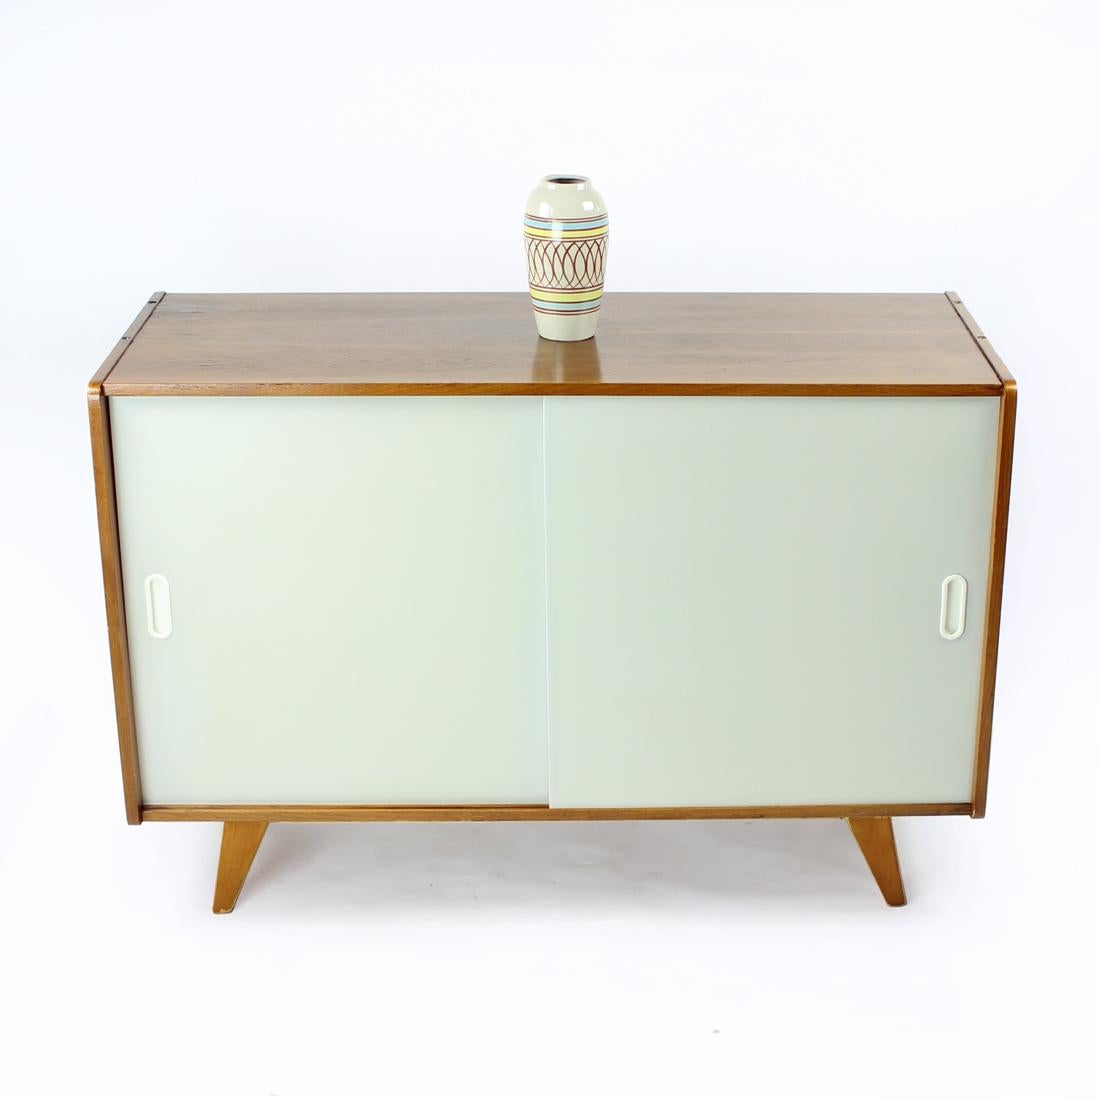 Completely restored sideboard with sliding doors. This item was produced in 1960s, in the mid-century design era of Czechoslovakian design. Designed by Jiri Jiroutek for Interier Praha. The sideboard is completely renovated with new finish in dark